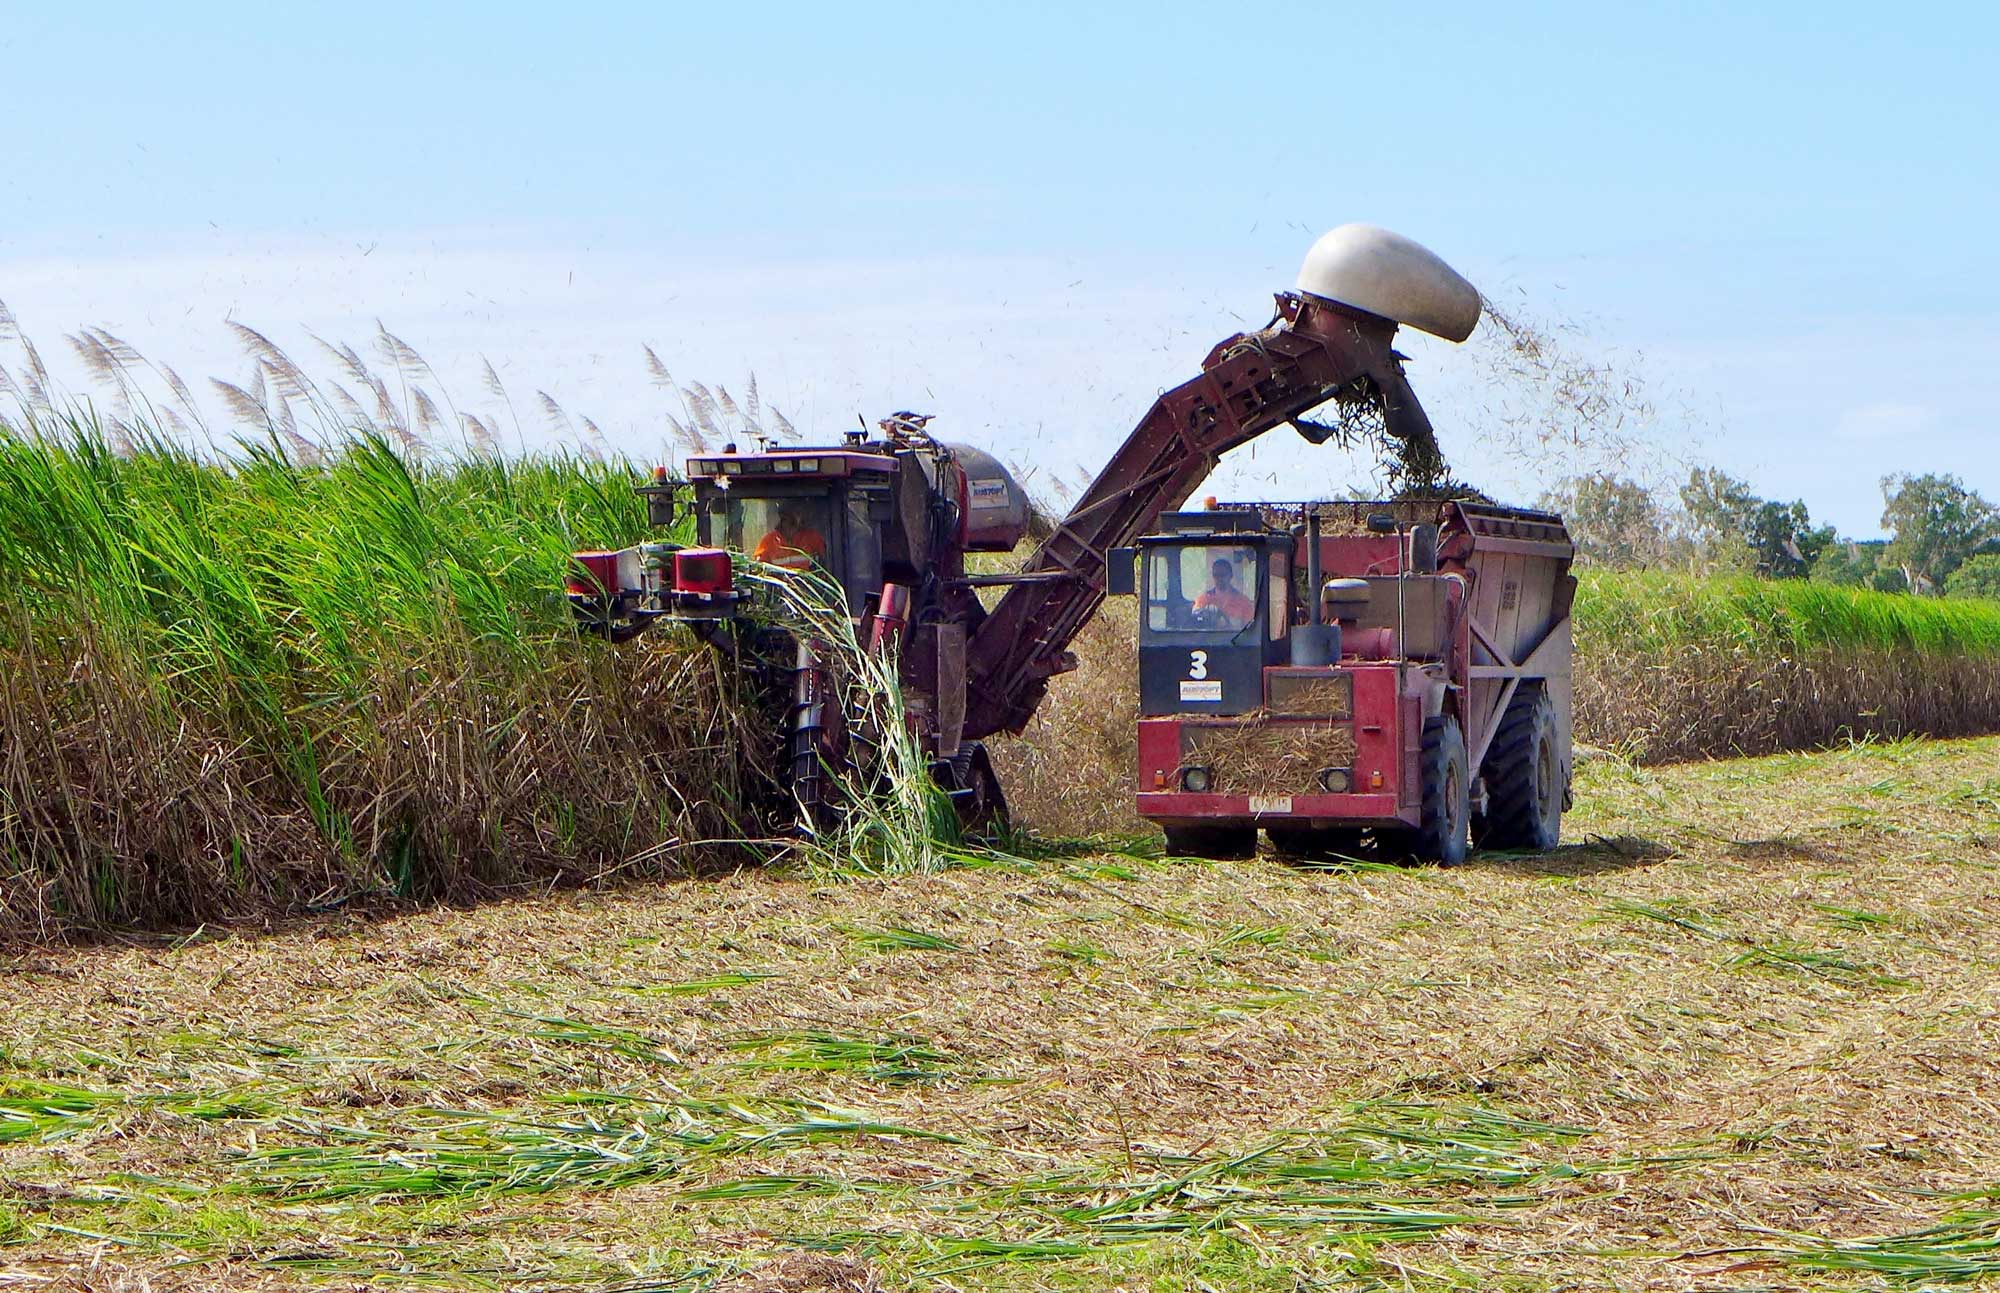 Photograph of a sugarcane harvester harvesting sugarcane in the field. The harvester is a red machine that has attachments for cutting sugarcane on the front and a chute that spews out sugarcane on one side. The sugarcane, which is cut into pieces, is loaded into a truck using the chute.